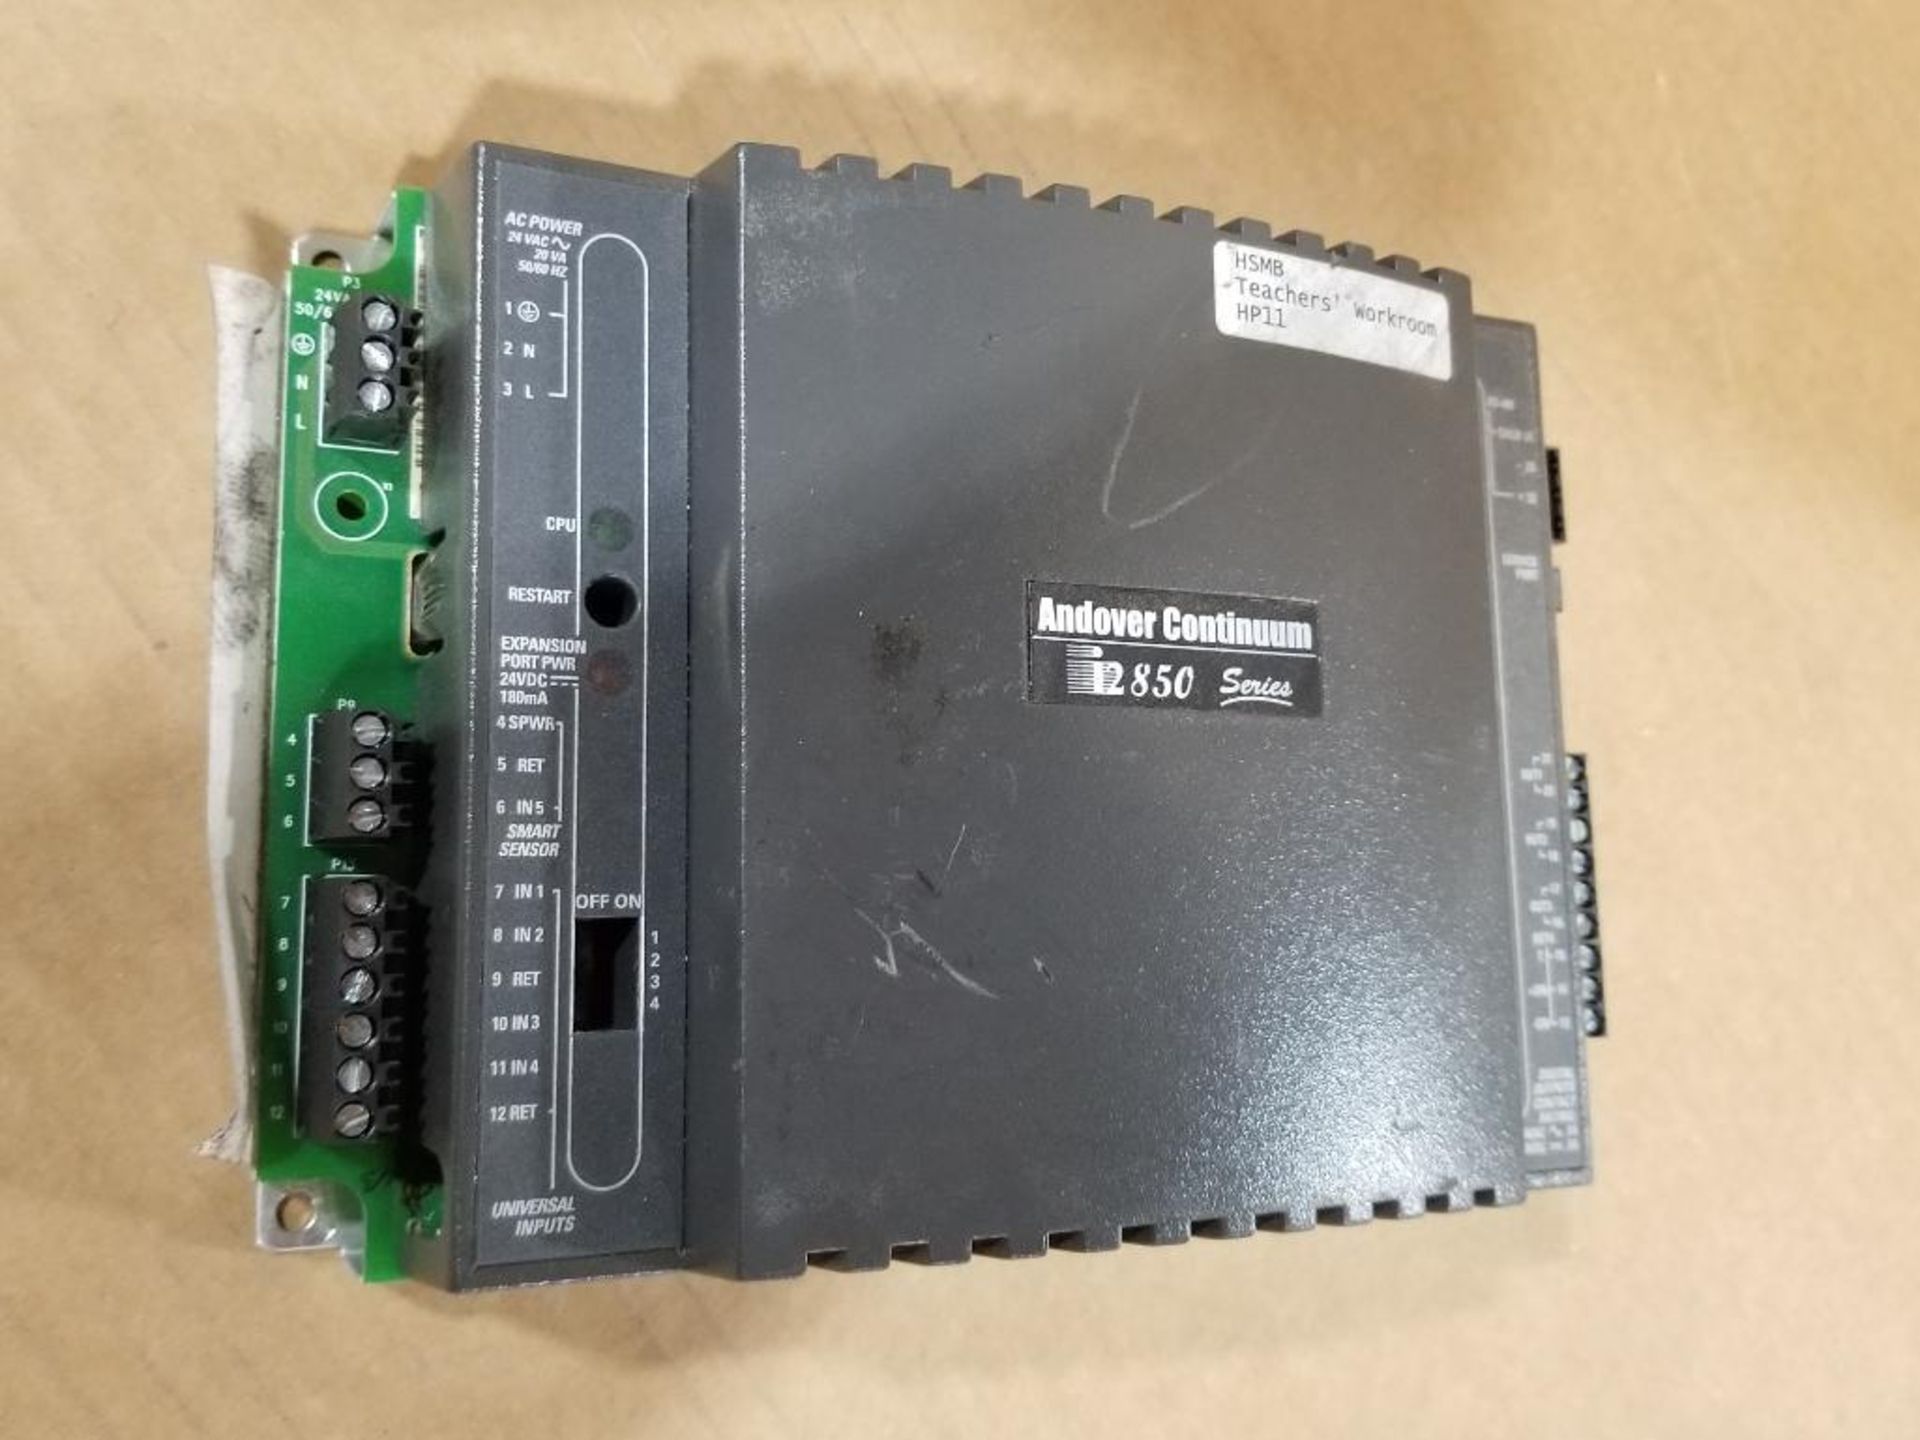 Qty 2 - Schneider Electric controller. Andover Continuum. Model B3920 and i2851. - Image 9 of 9